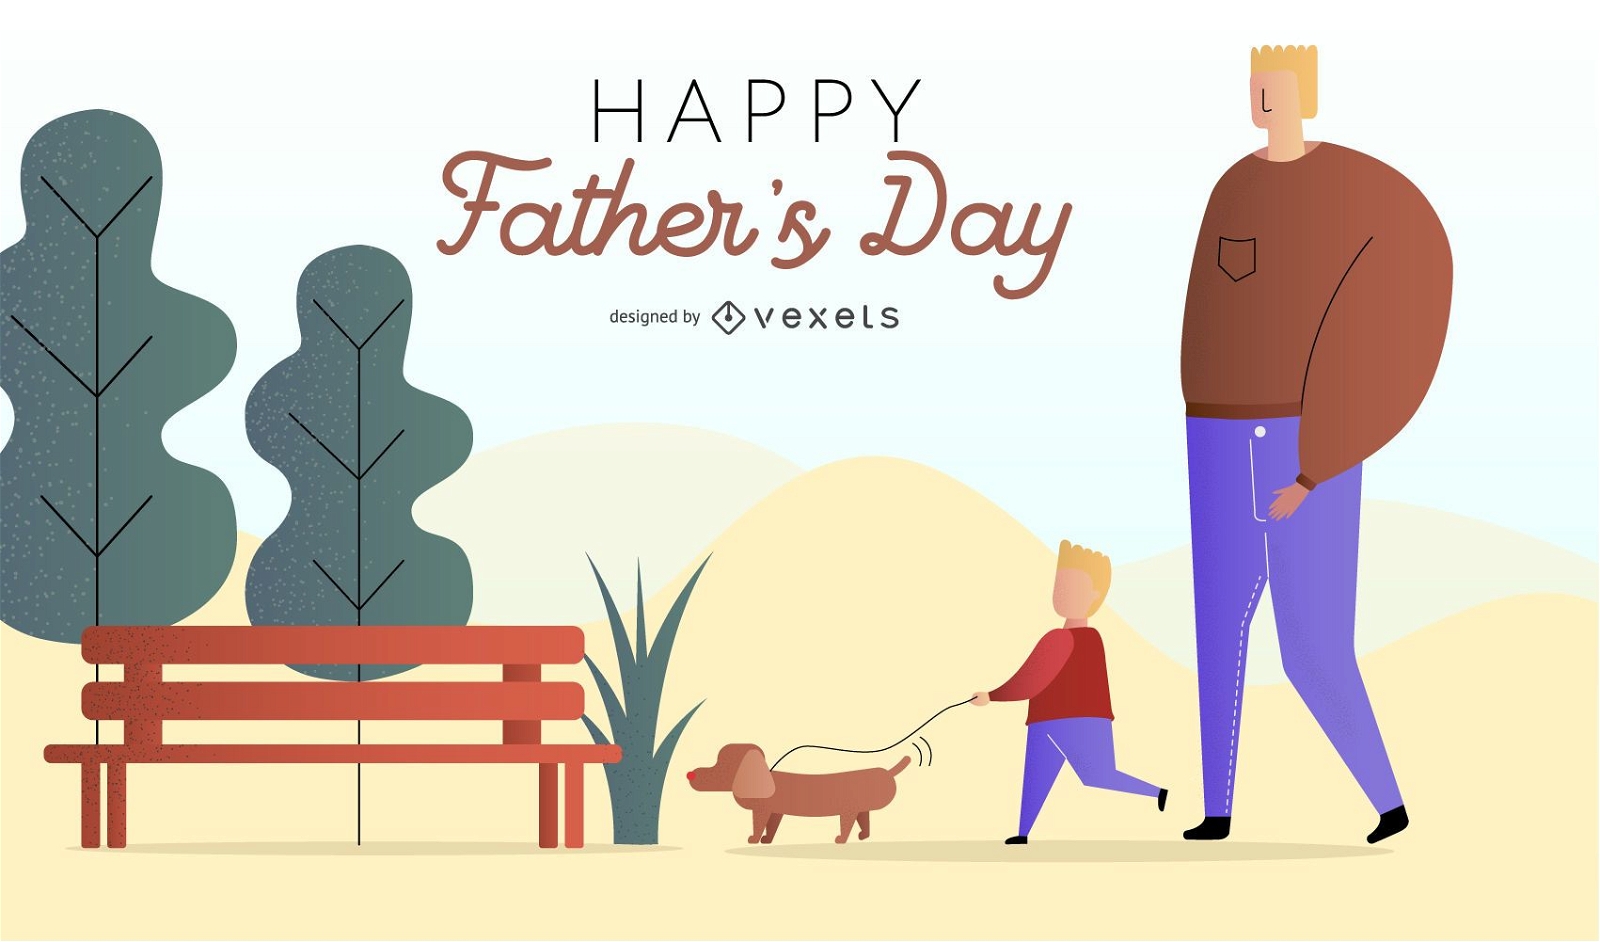 Happy Father's Day Greeting Illustration